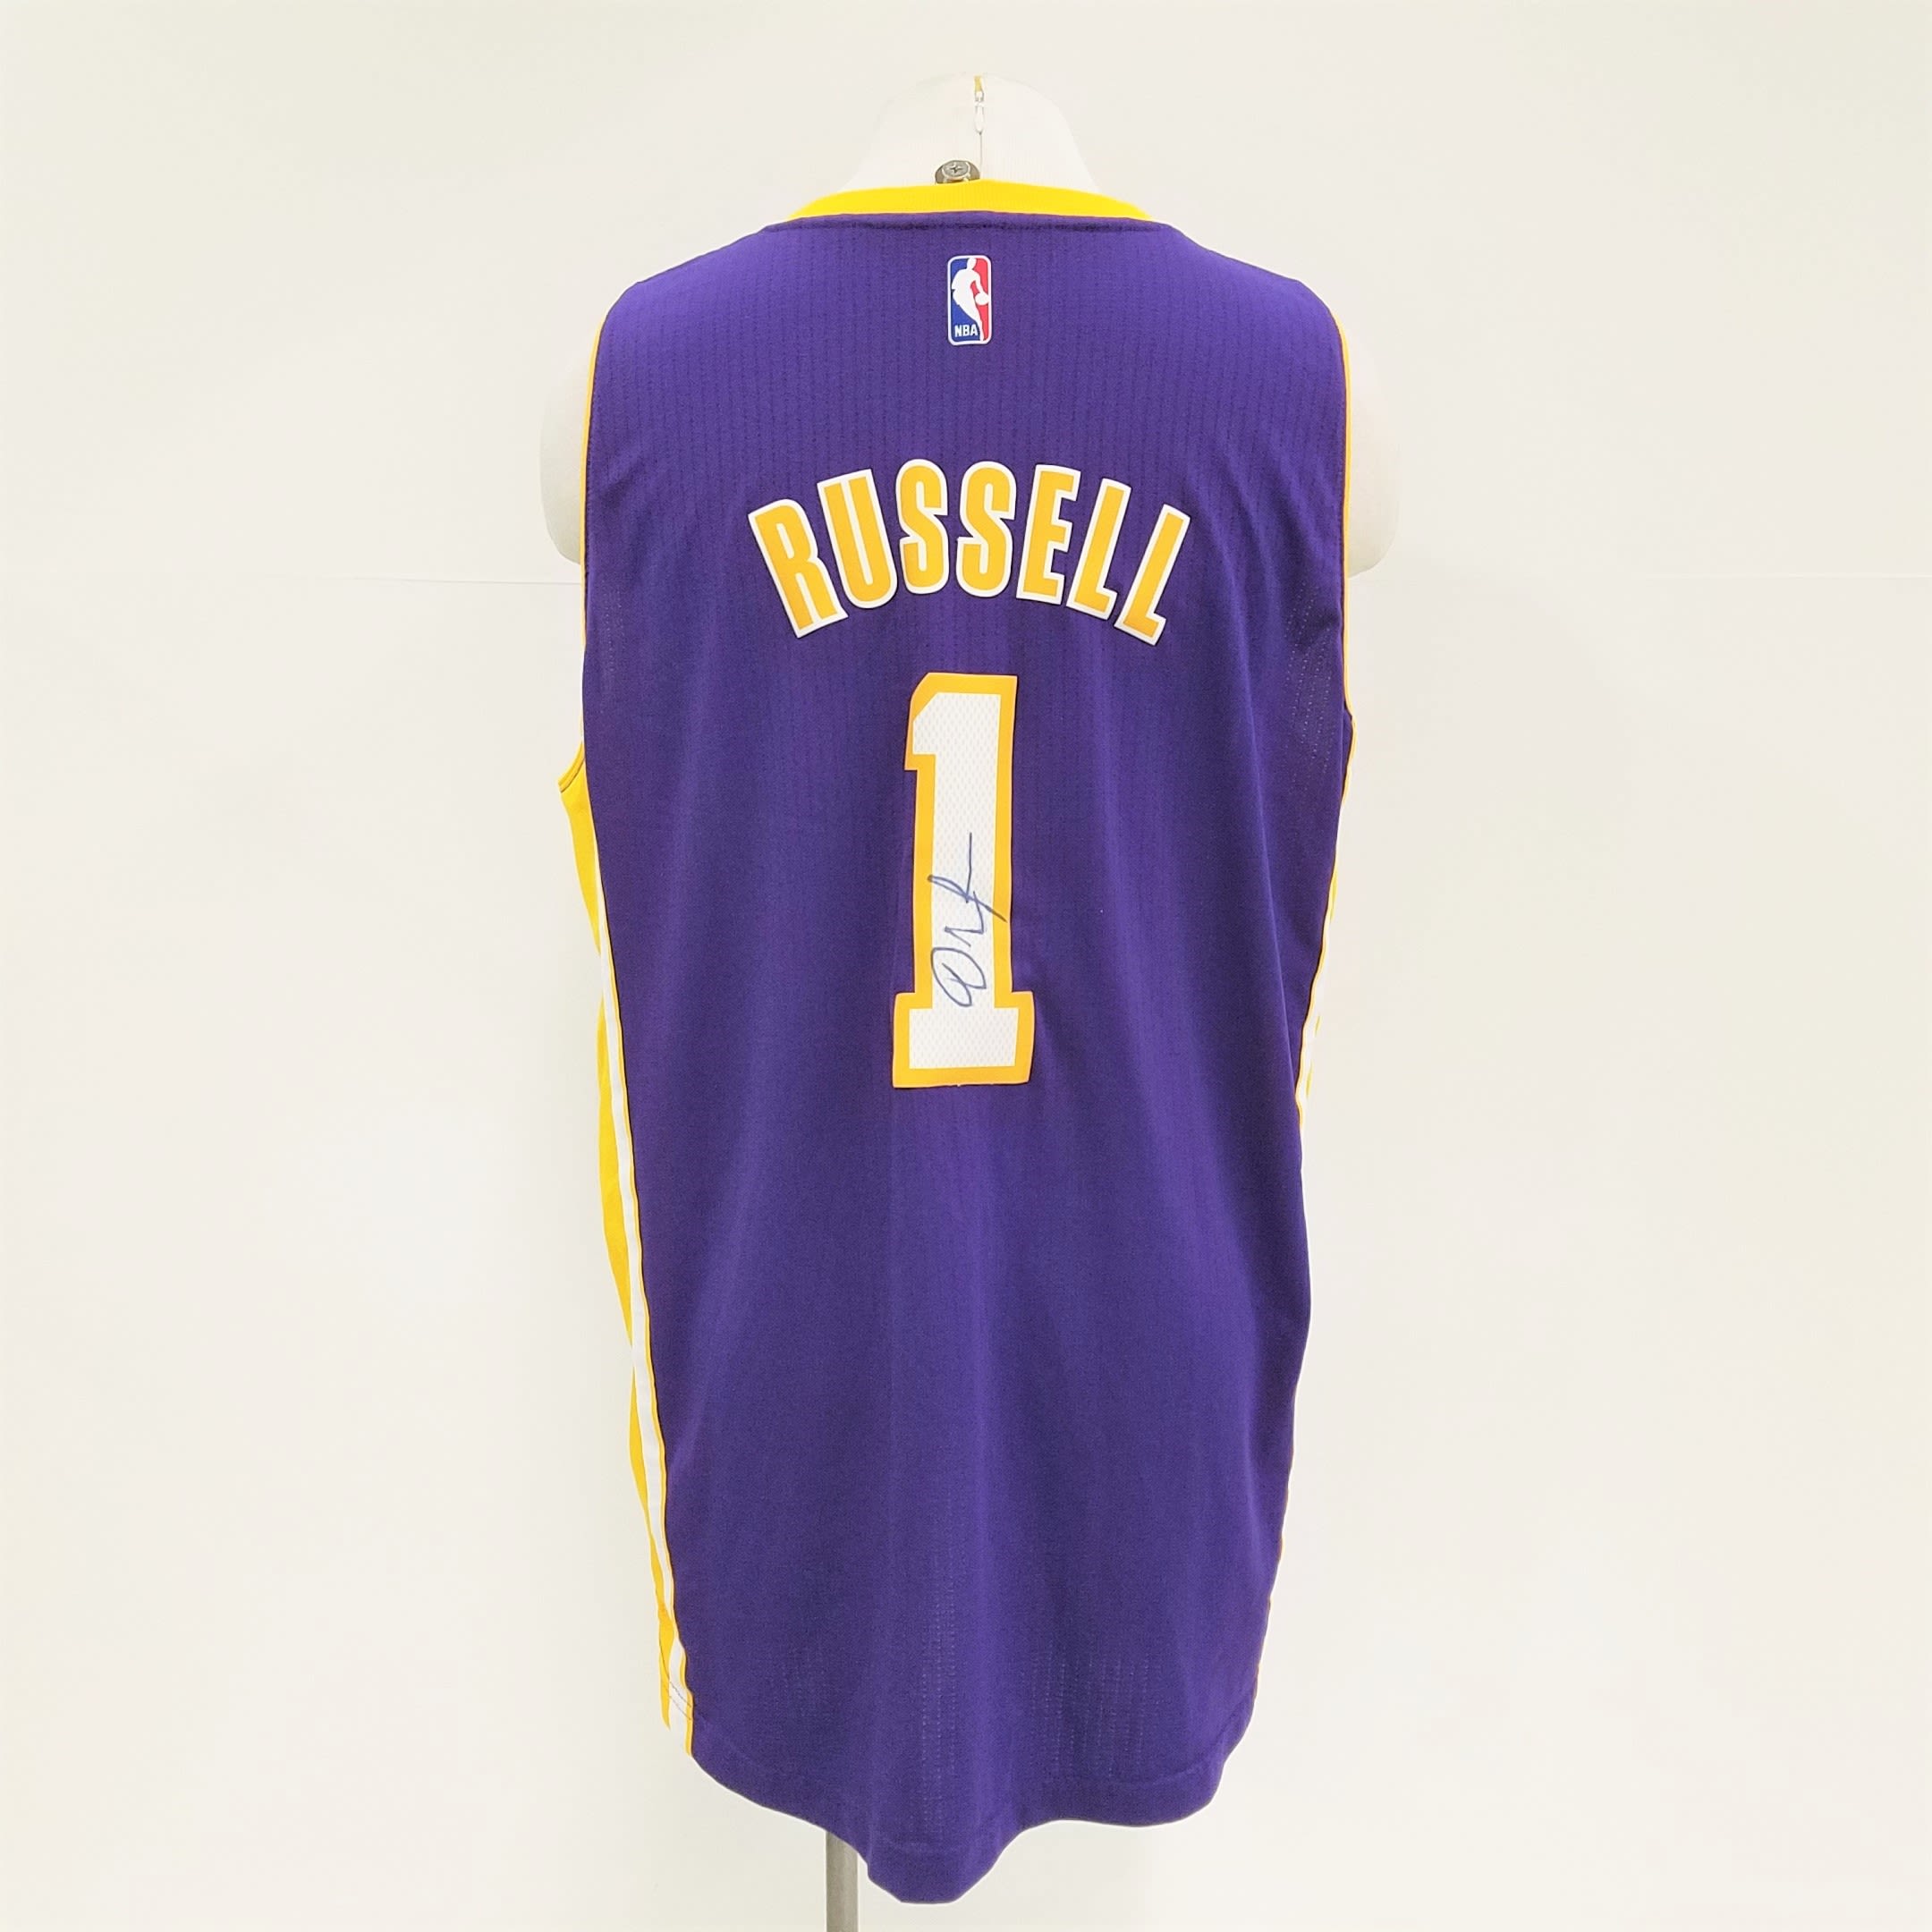 Adidas NBA Los Angeles Lakers D’Angelo Russell Basketball Jersey